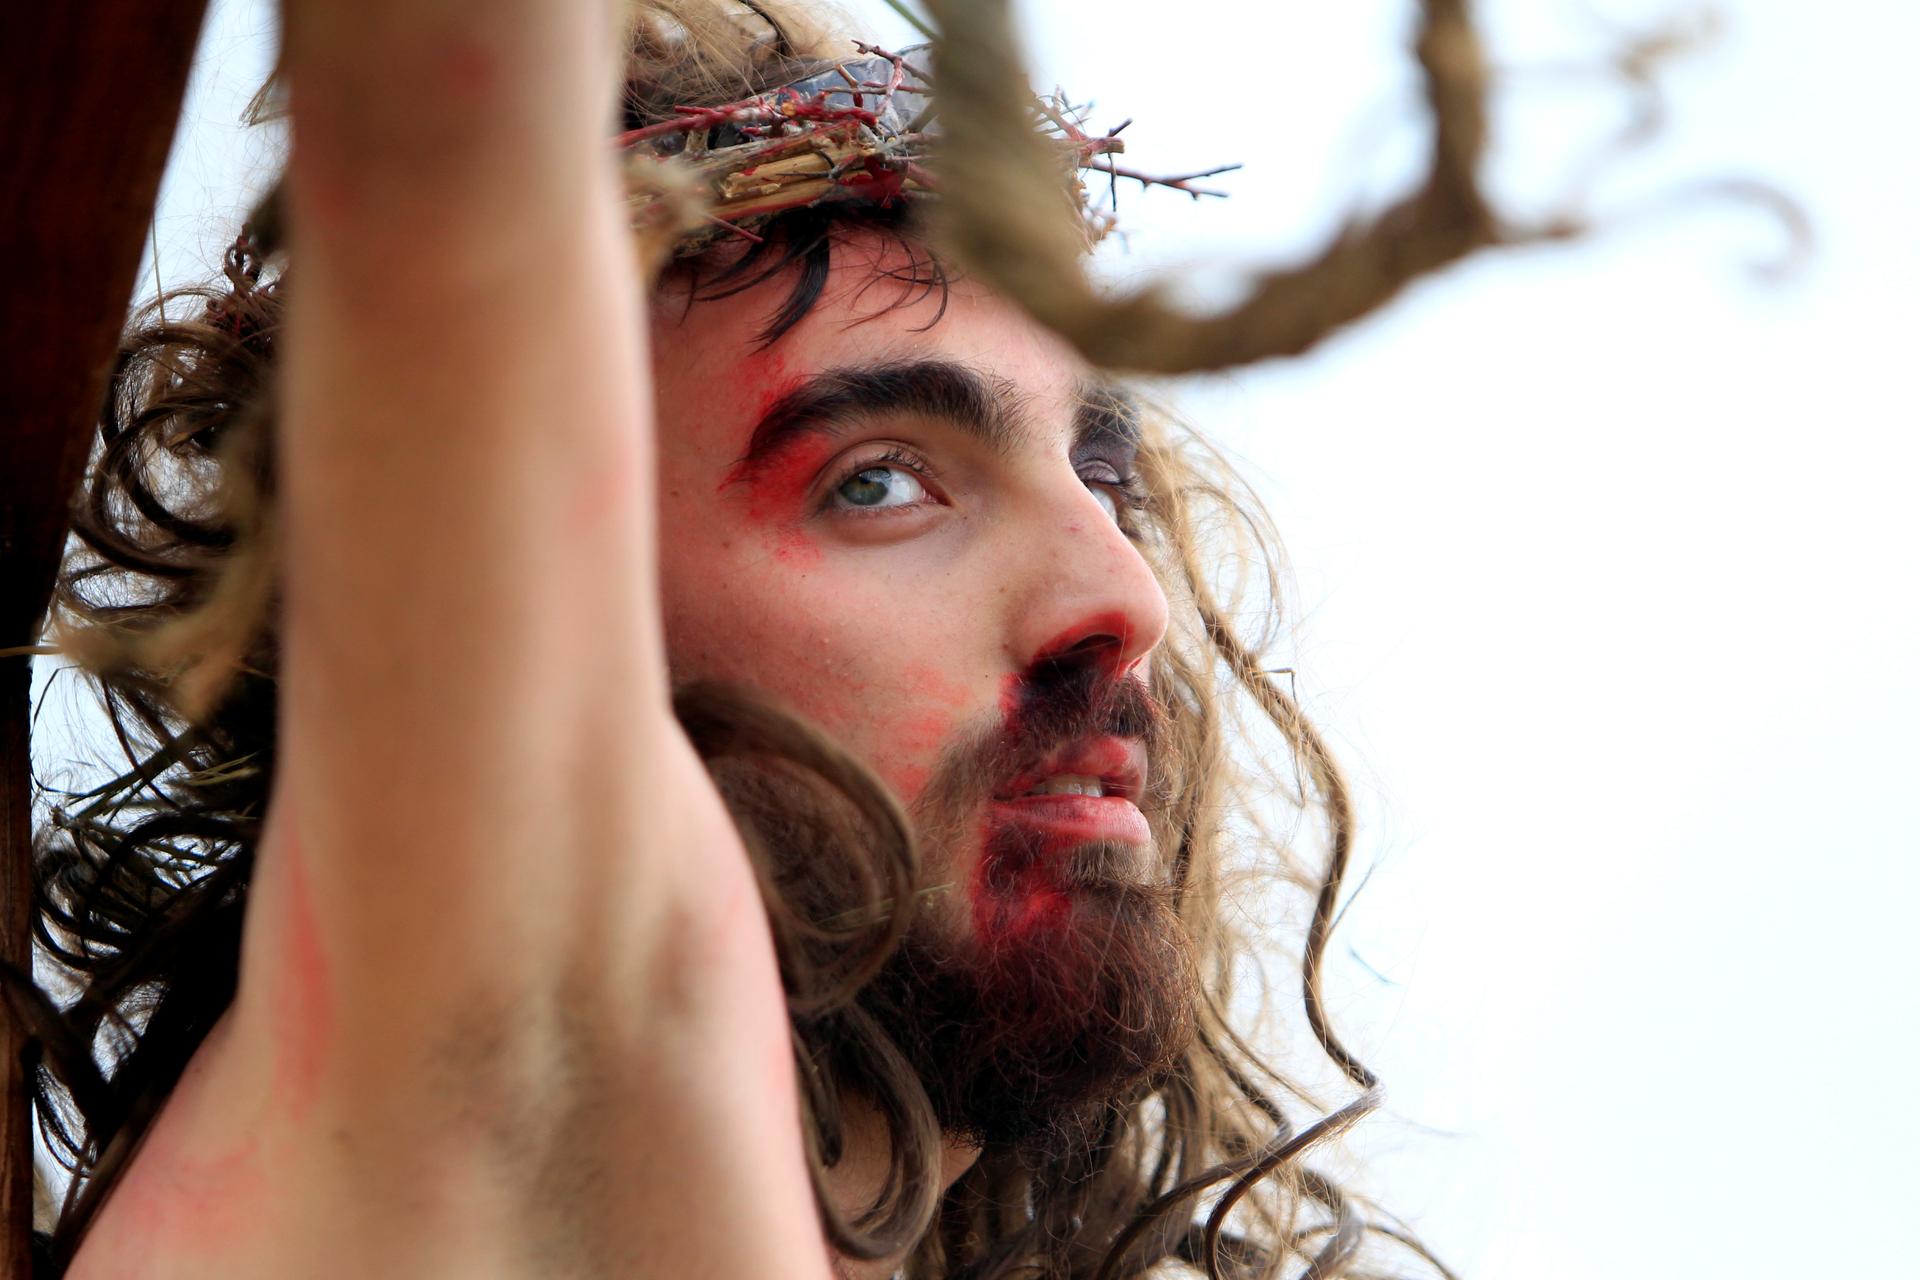 A Christian man, portraying Jesus Christ, is hung on a cross during a re-enactment of the crucifixion of Jesus Christ on Good Friday in al-Qraya village, in southern Lebanon on April 14, 2017. Muslims also revere Jesus as a prophet. In the Quran, the stor